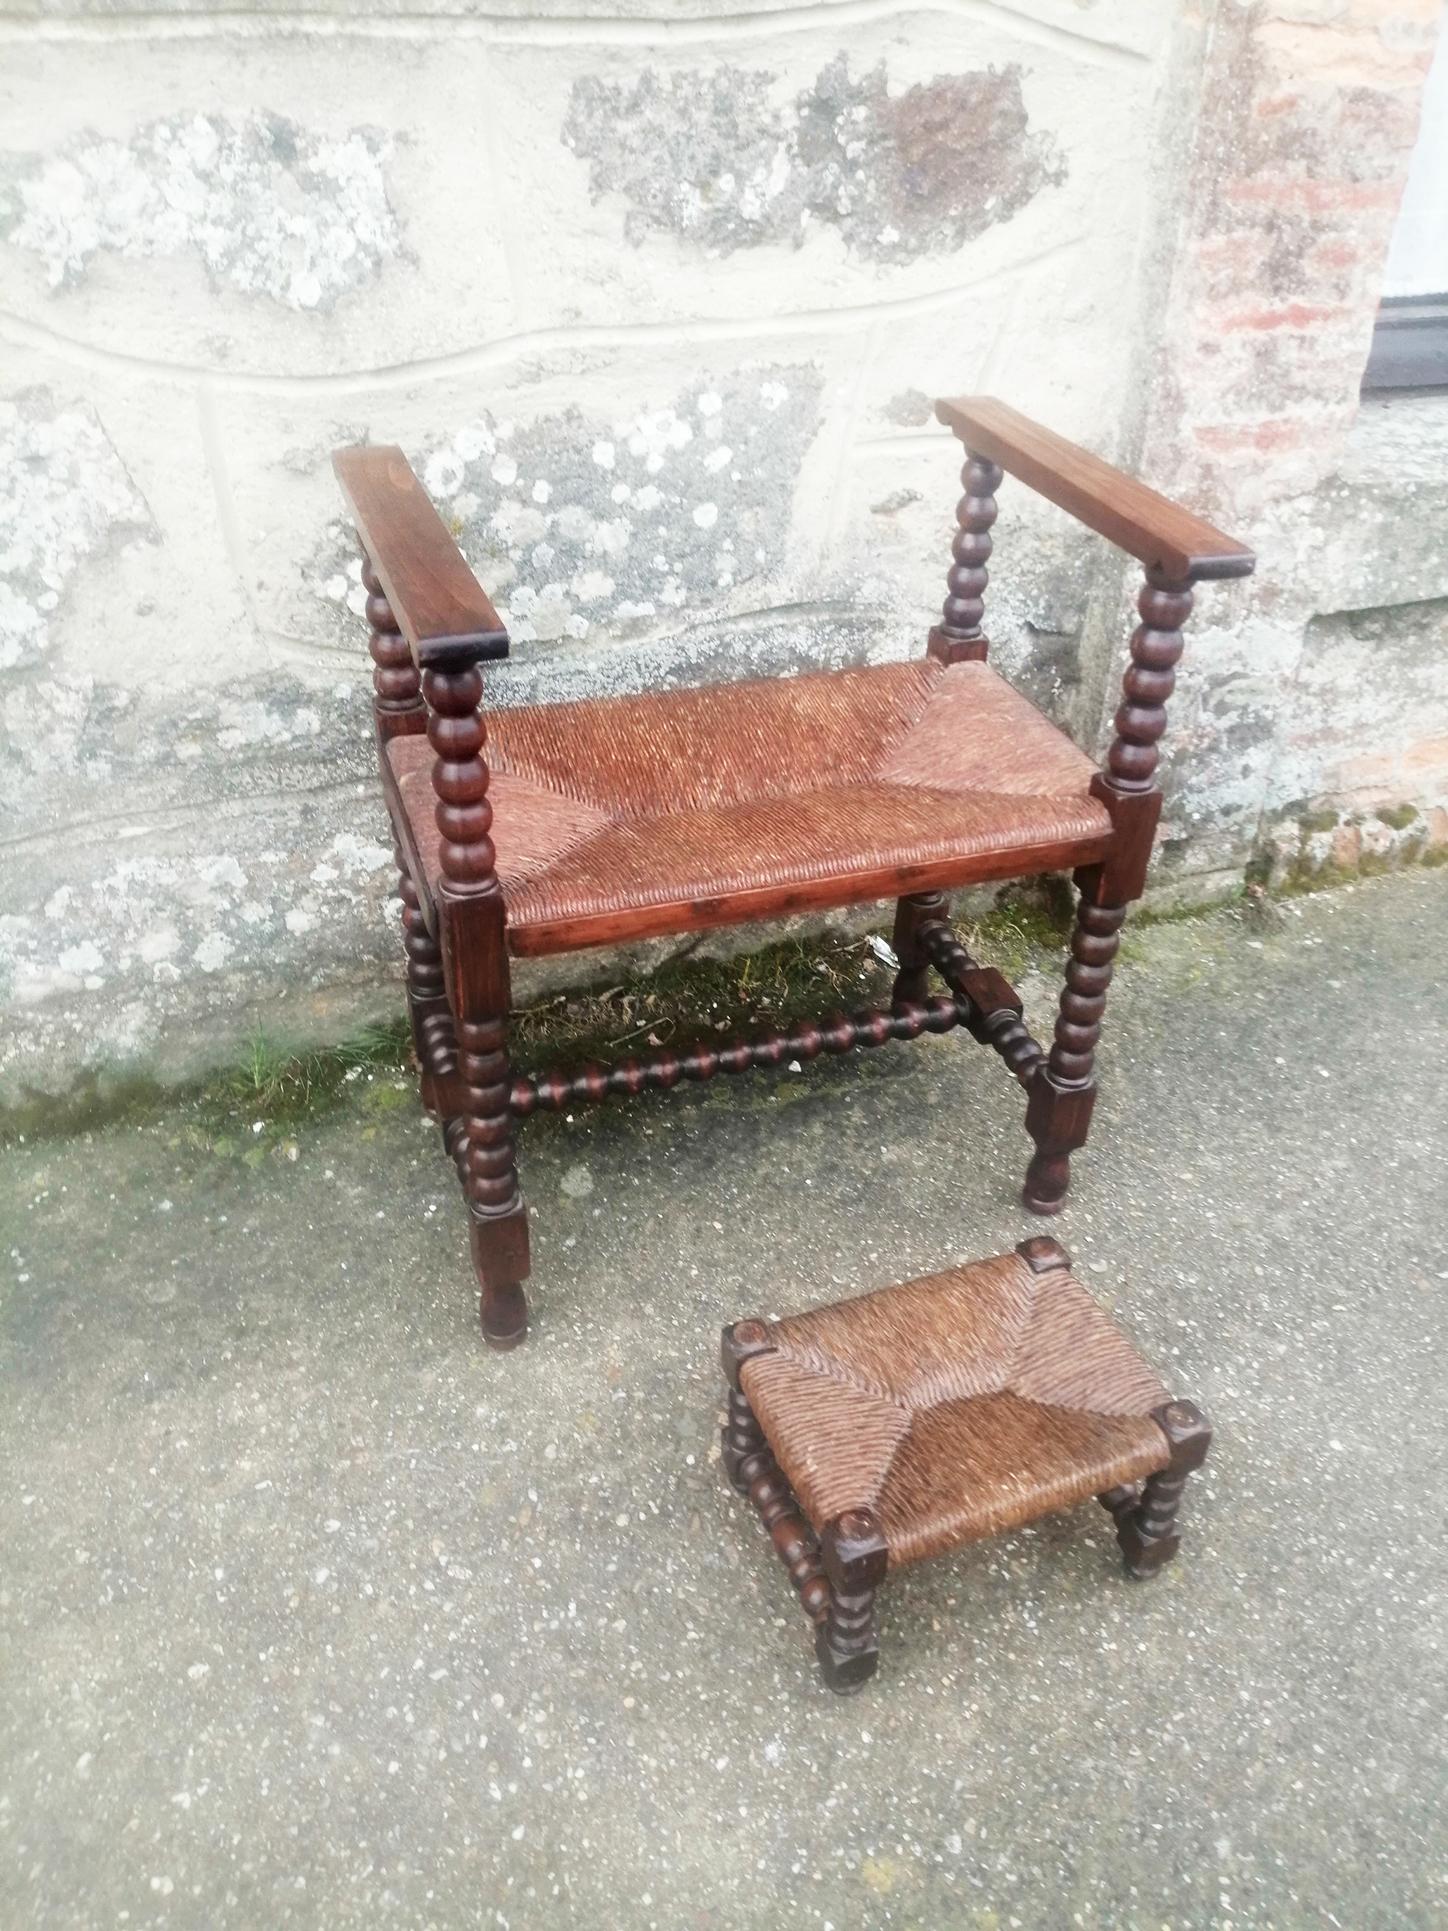 Rare stool and footstools with turned legs and natural fiber seat.It is not at all common to find the two-piece set, very unusual

Chestnut wood

 Seat size: W 62 x D 45 x H 70, Seat heigh 46
Footstools size: 30 x 22 x 18.

Original and unusual